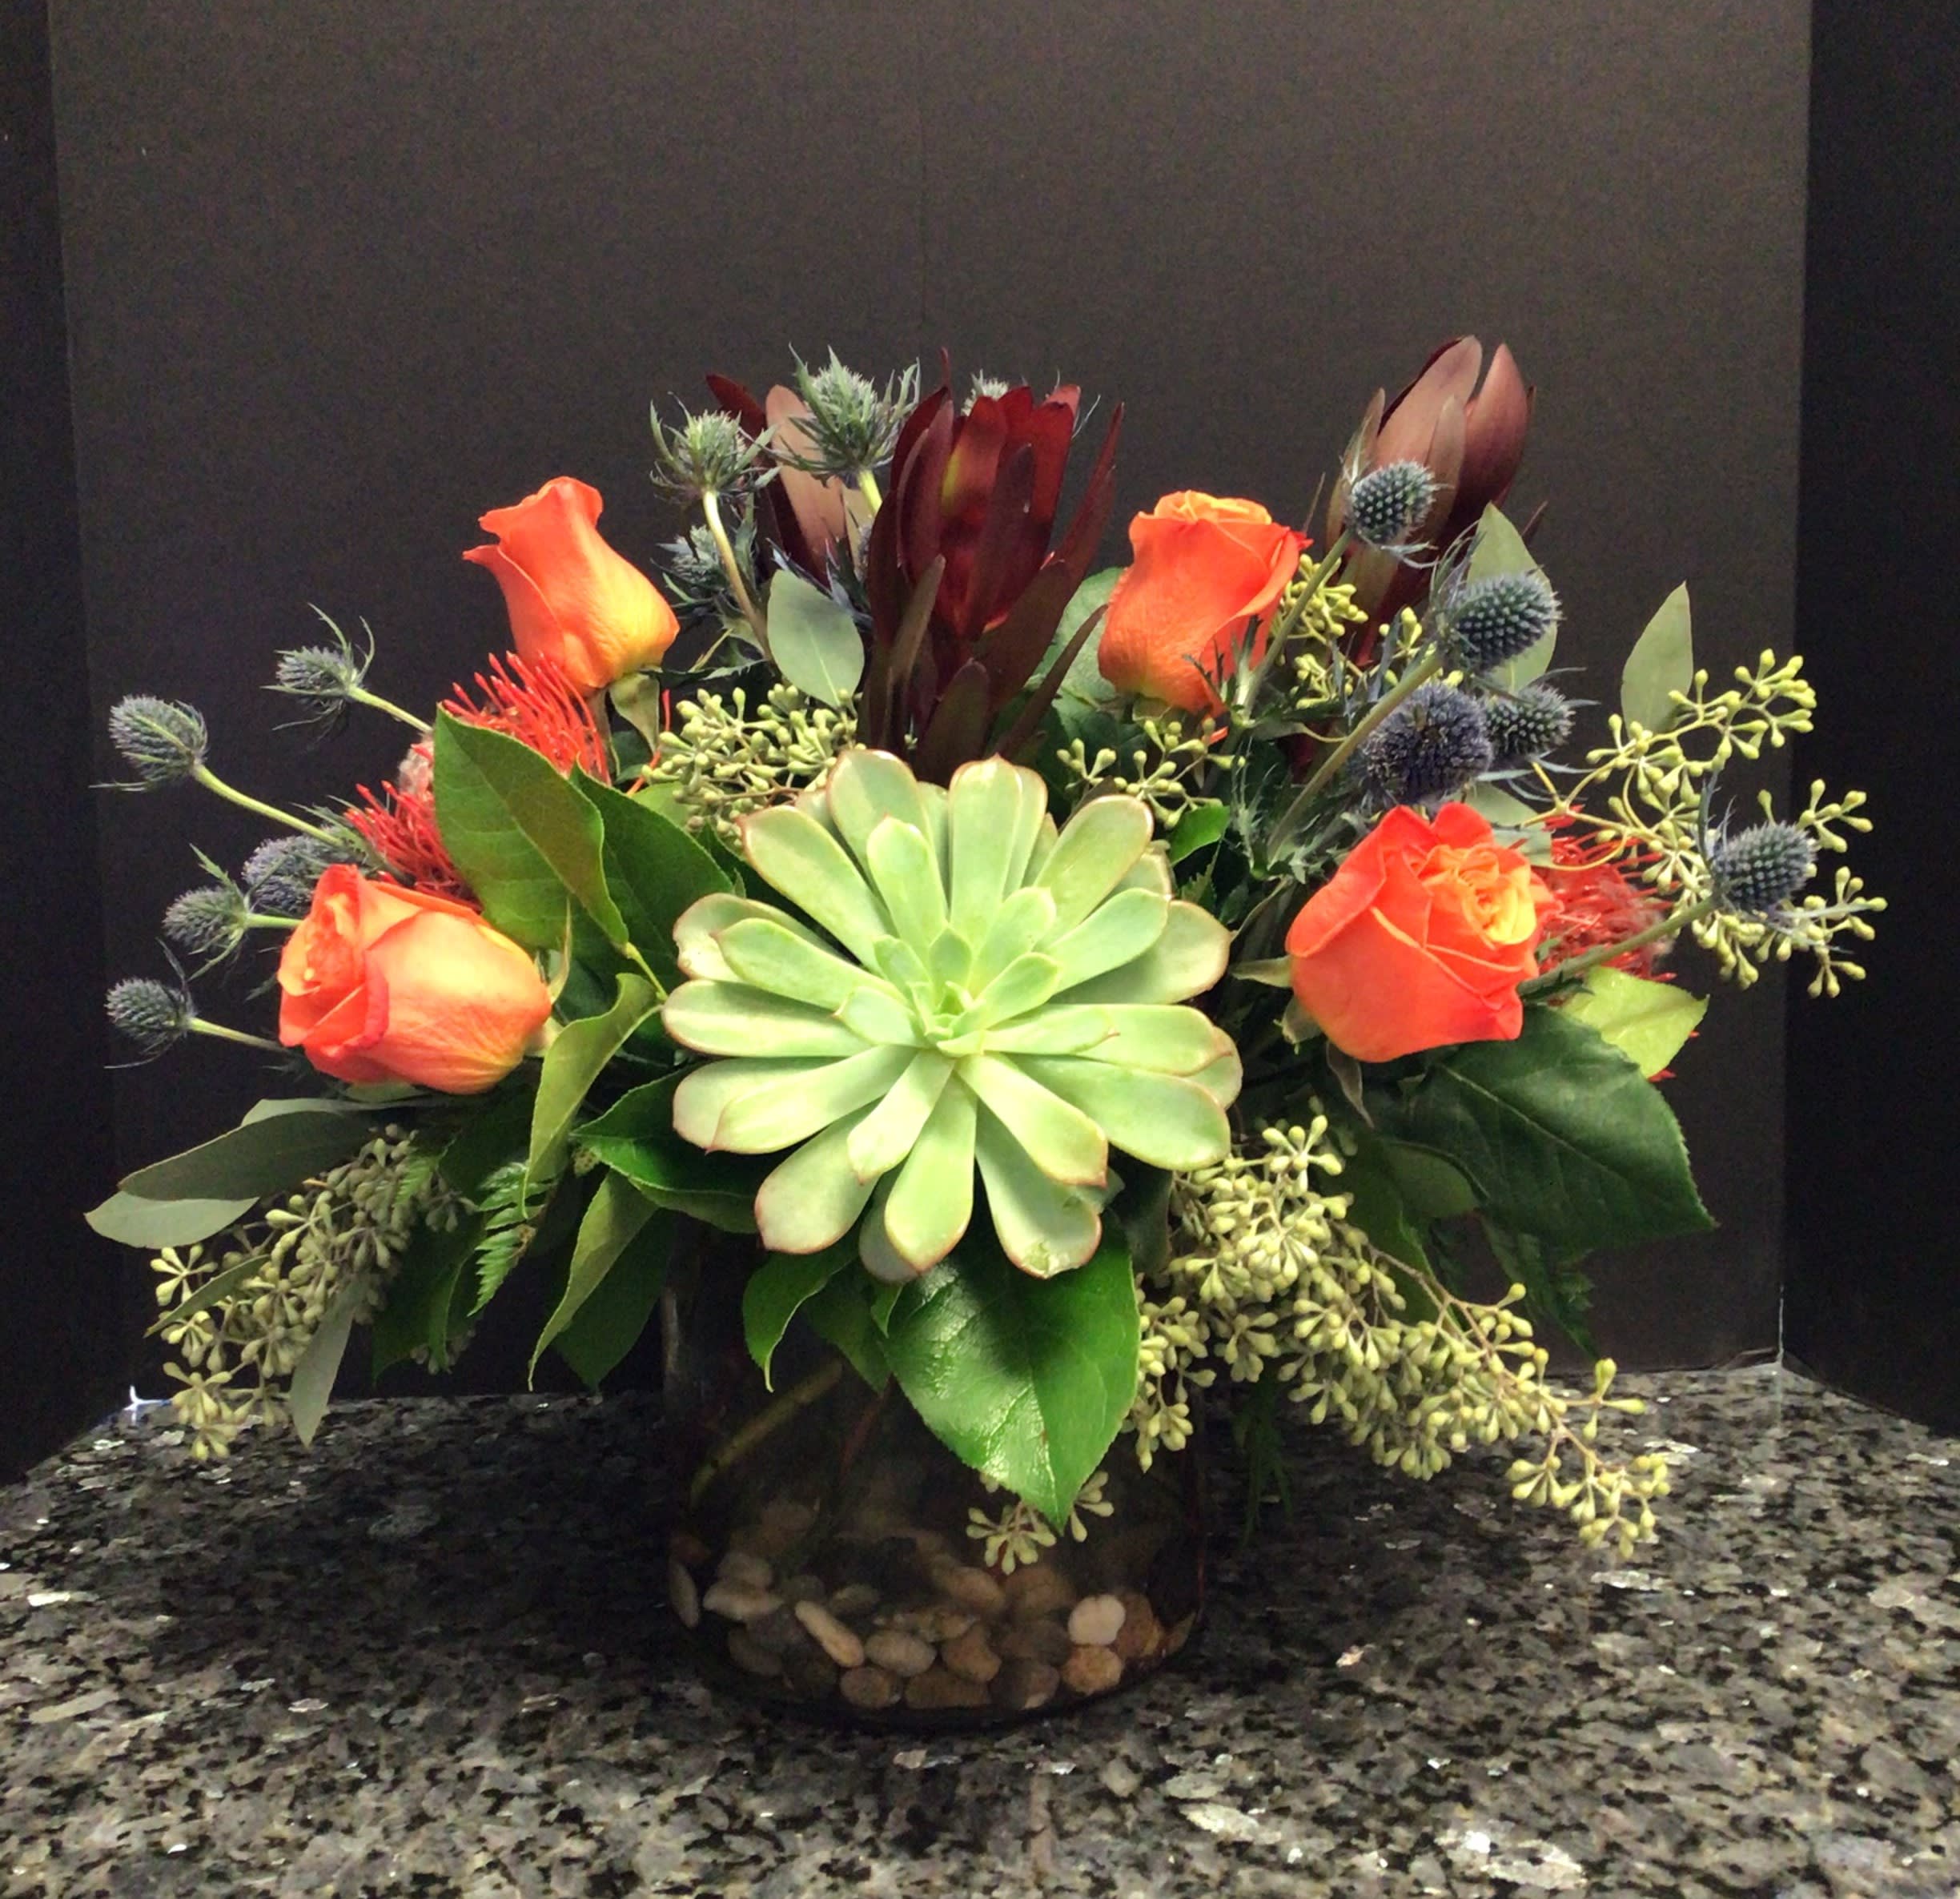 Arizona Sunset - A Low and Airy Mixed Arrangement with a Desert Vibe with Pebble Rocks.